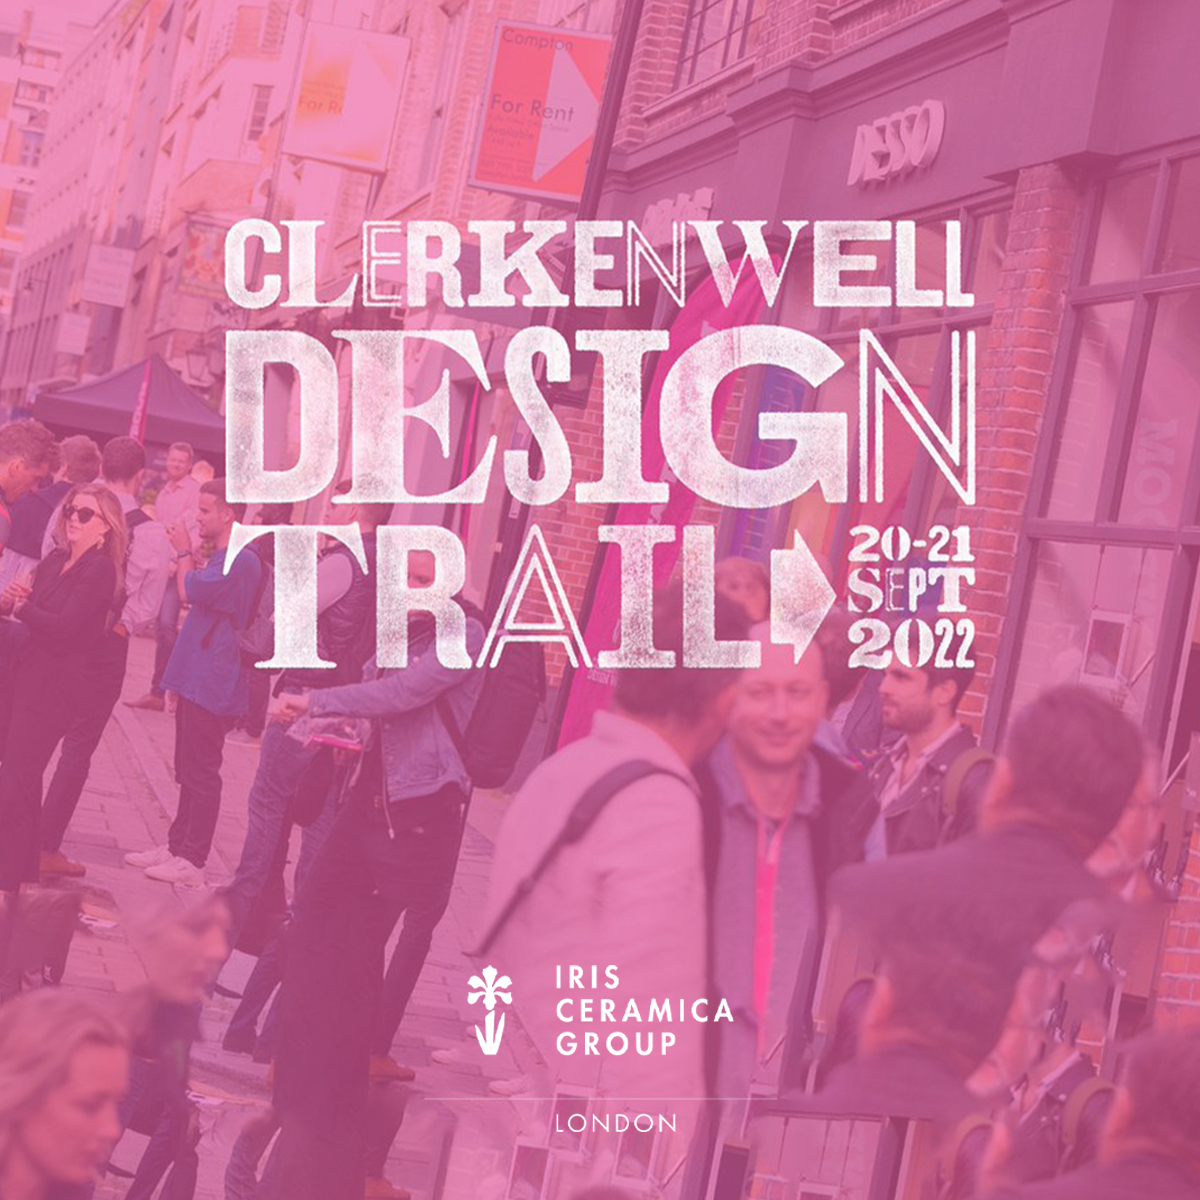 OUR FLAGSHIP STORE STARS IN THE CLERKENWELL DESIGN TRAIL 